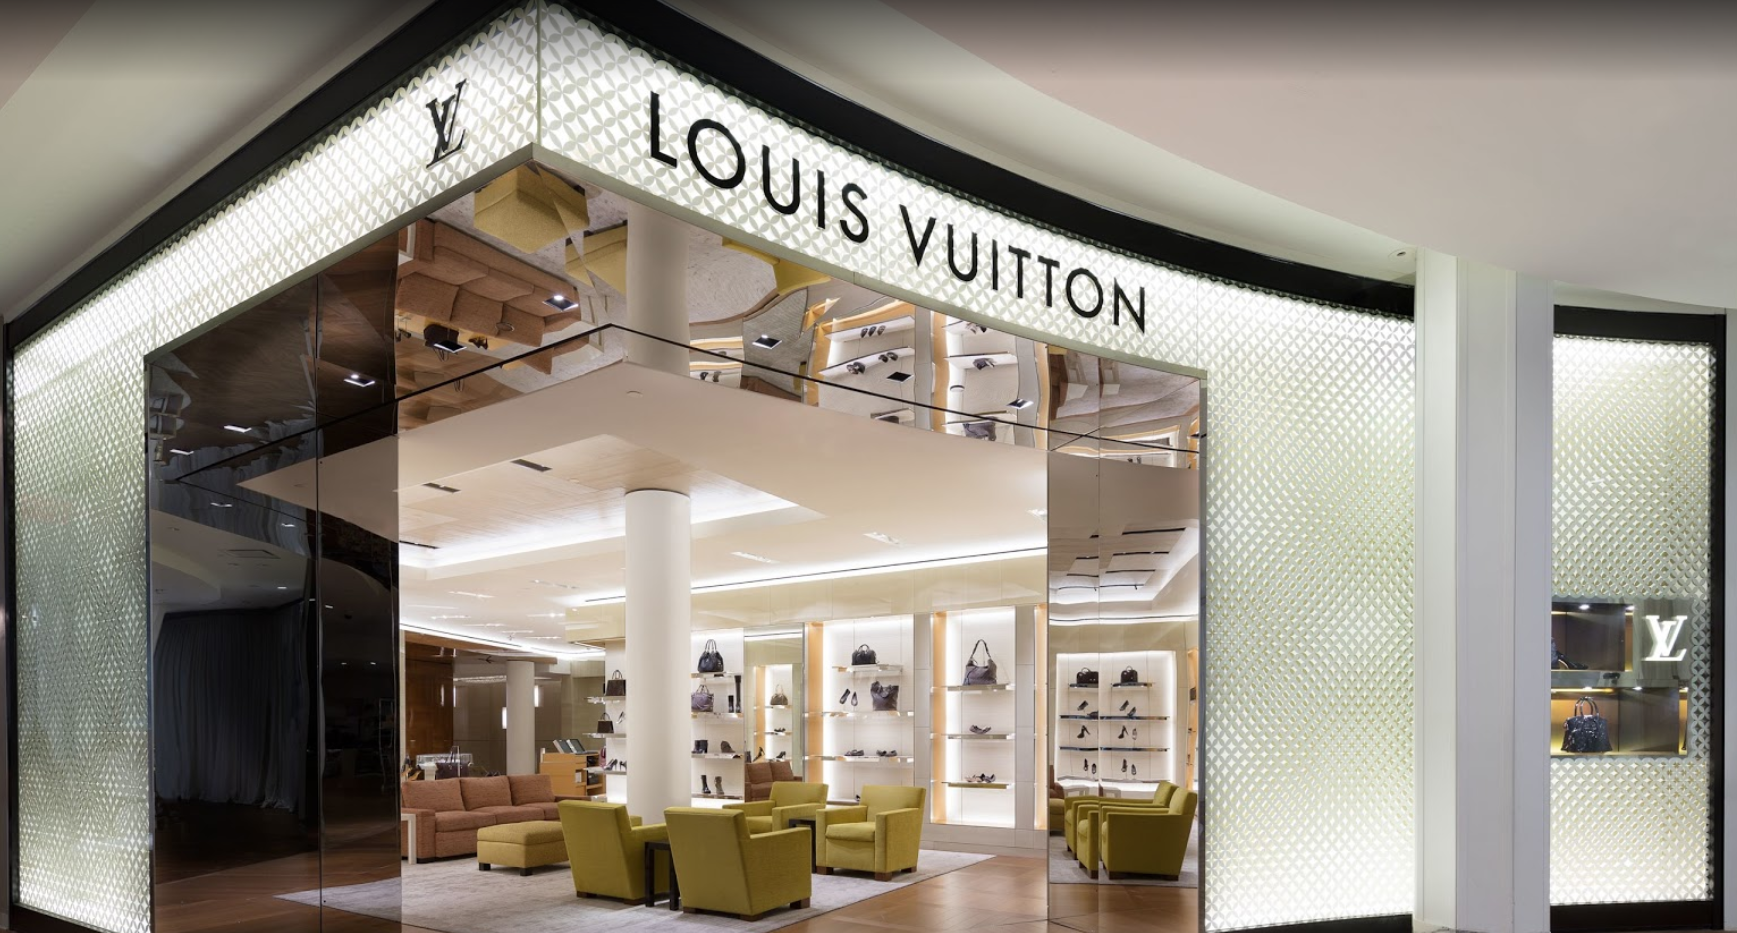 Macy's Louis Vuitton Nyc  Natural Resource Department